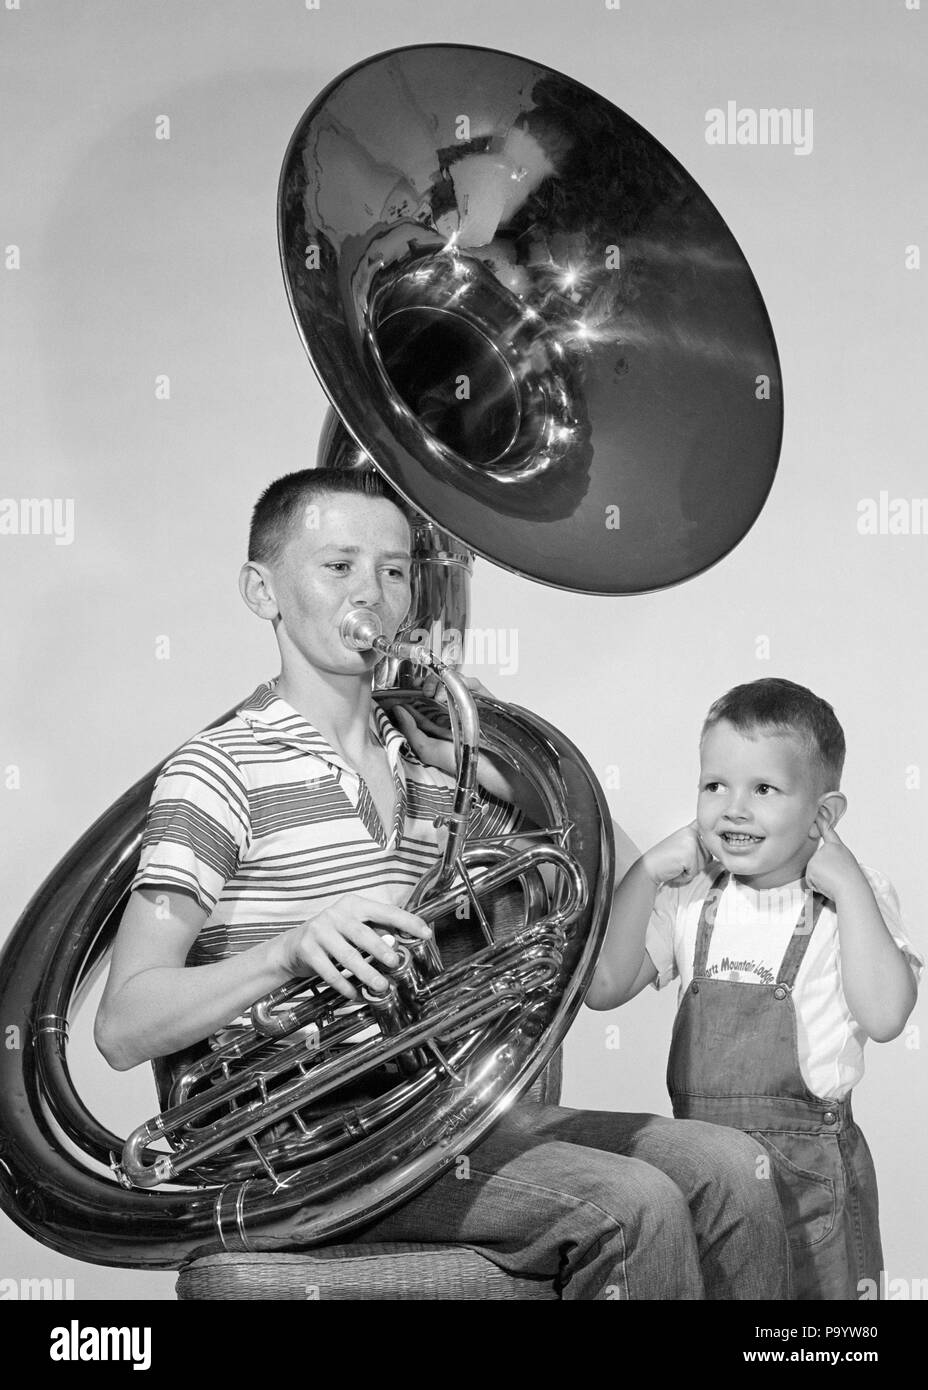 1950s TEEN BOY IN STRIPE SHIRT JEANS PLAYING TUBA SMALLER BROTHER IN BIB OVERALLS SMILING INDEX FINGERS STUCK IN BOTH EARS  - m11569 TAY001 HARS JEANS EXPRESSION OLD TIME NOSTALGIA BROTHER OLD FASHION 1 JUVENILE FACIAL EARS COMMUNICATION INSTRUMENTS COMIC SAFETY FINGERS NOISE FAMILIES LIFESTYLE HORN SOUND MUSICIAN BROTHERS HOME LIFE COMMUNICATING STRIPE HALF-LENGTH PERSONS OVERALLS MALES RISK TEENAGE BOY ENTERTAINMENT SIBLINGS EXPRESSIONS B&W HORNS MUSICIANS OVERSIZED PERFORMING ARTS INDEX WEIRD BOTH LEISURE MANUAL PROTECTION STUCK LOUD OVERSIZE POWERFUL ZANY UNCONVENTIONAL SIBLING SMILES Stock Photo